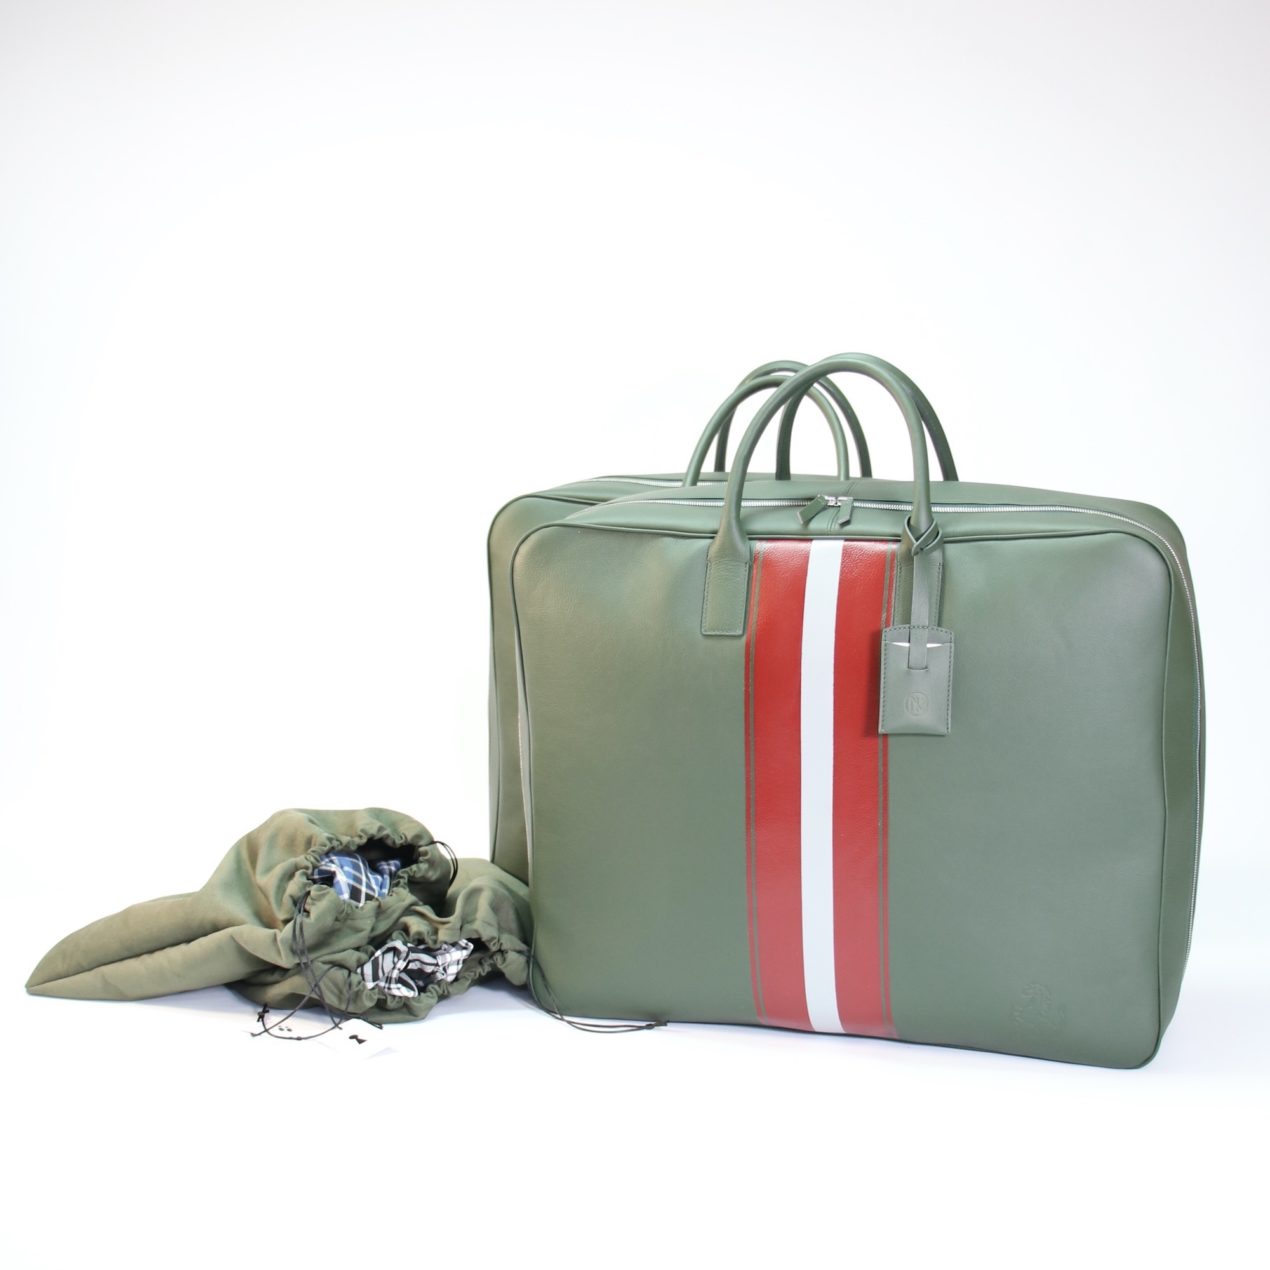 suitcase measure bespoke fitted luggage Connolly Crushed Grain Vaumol + Alcantara Schedoni